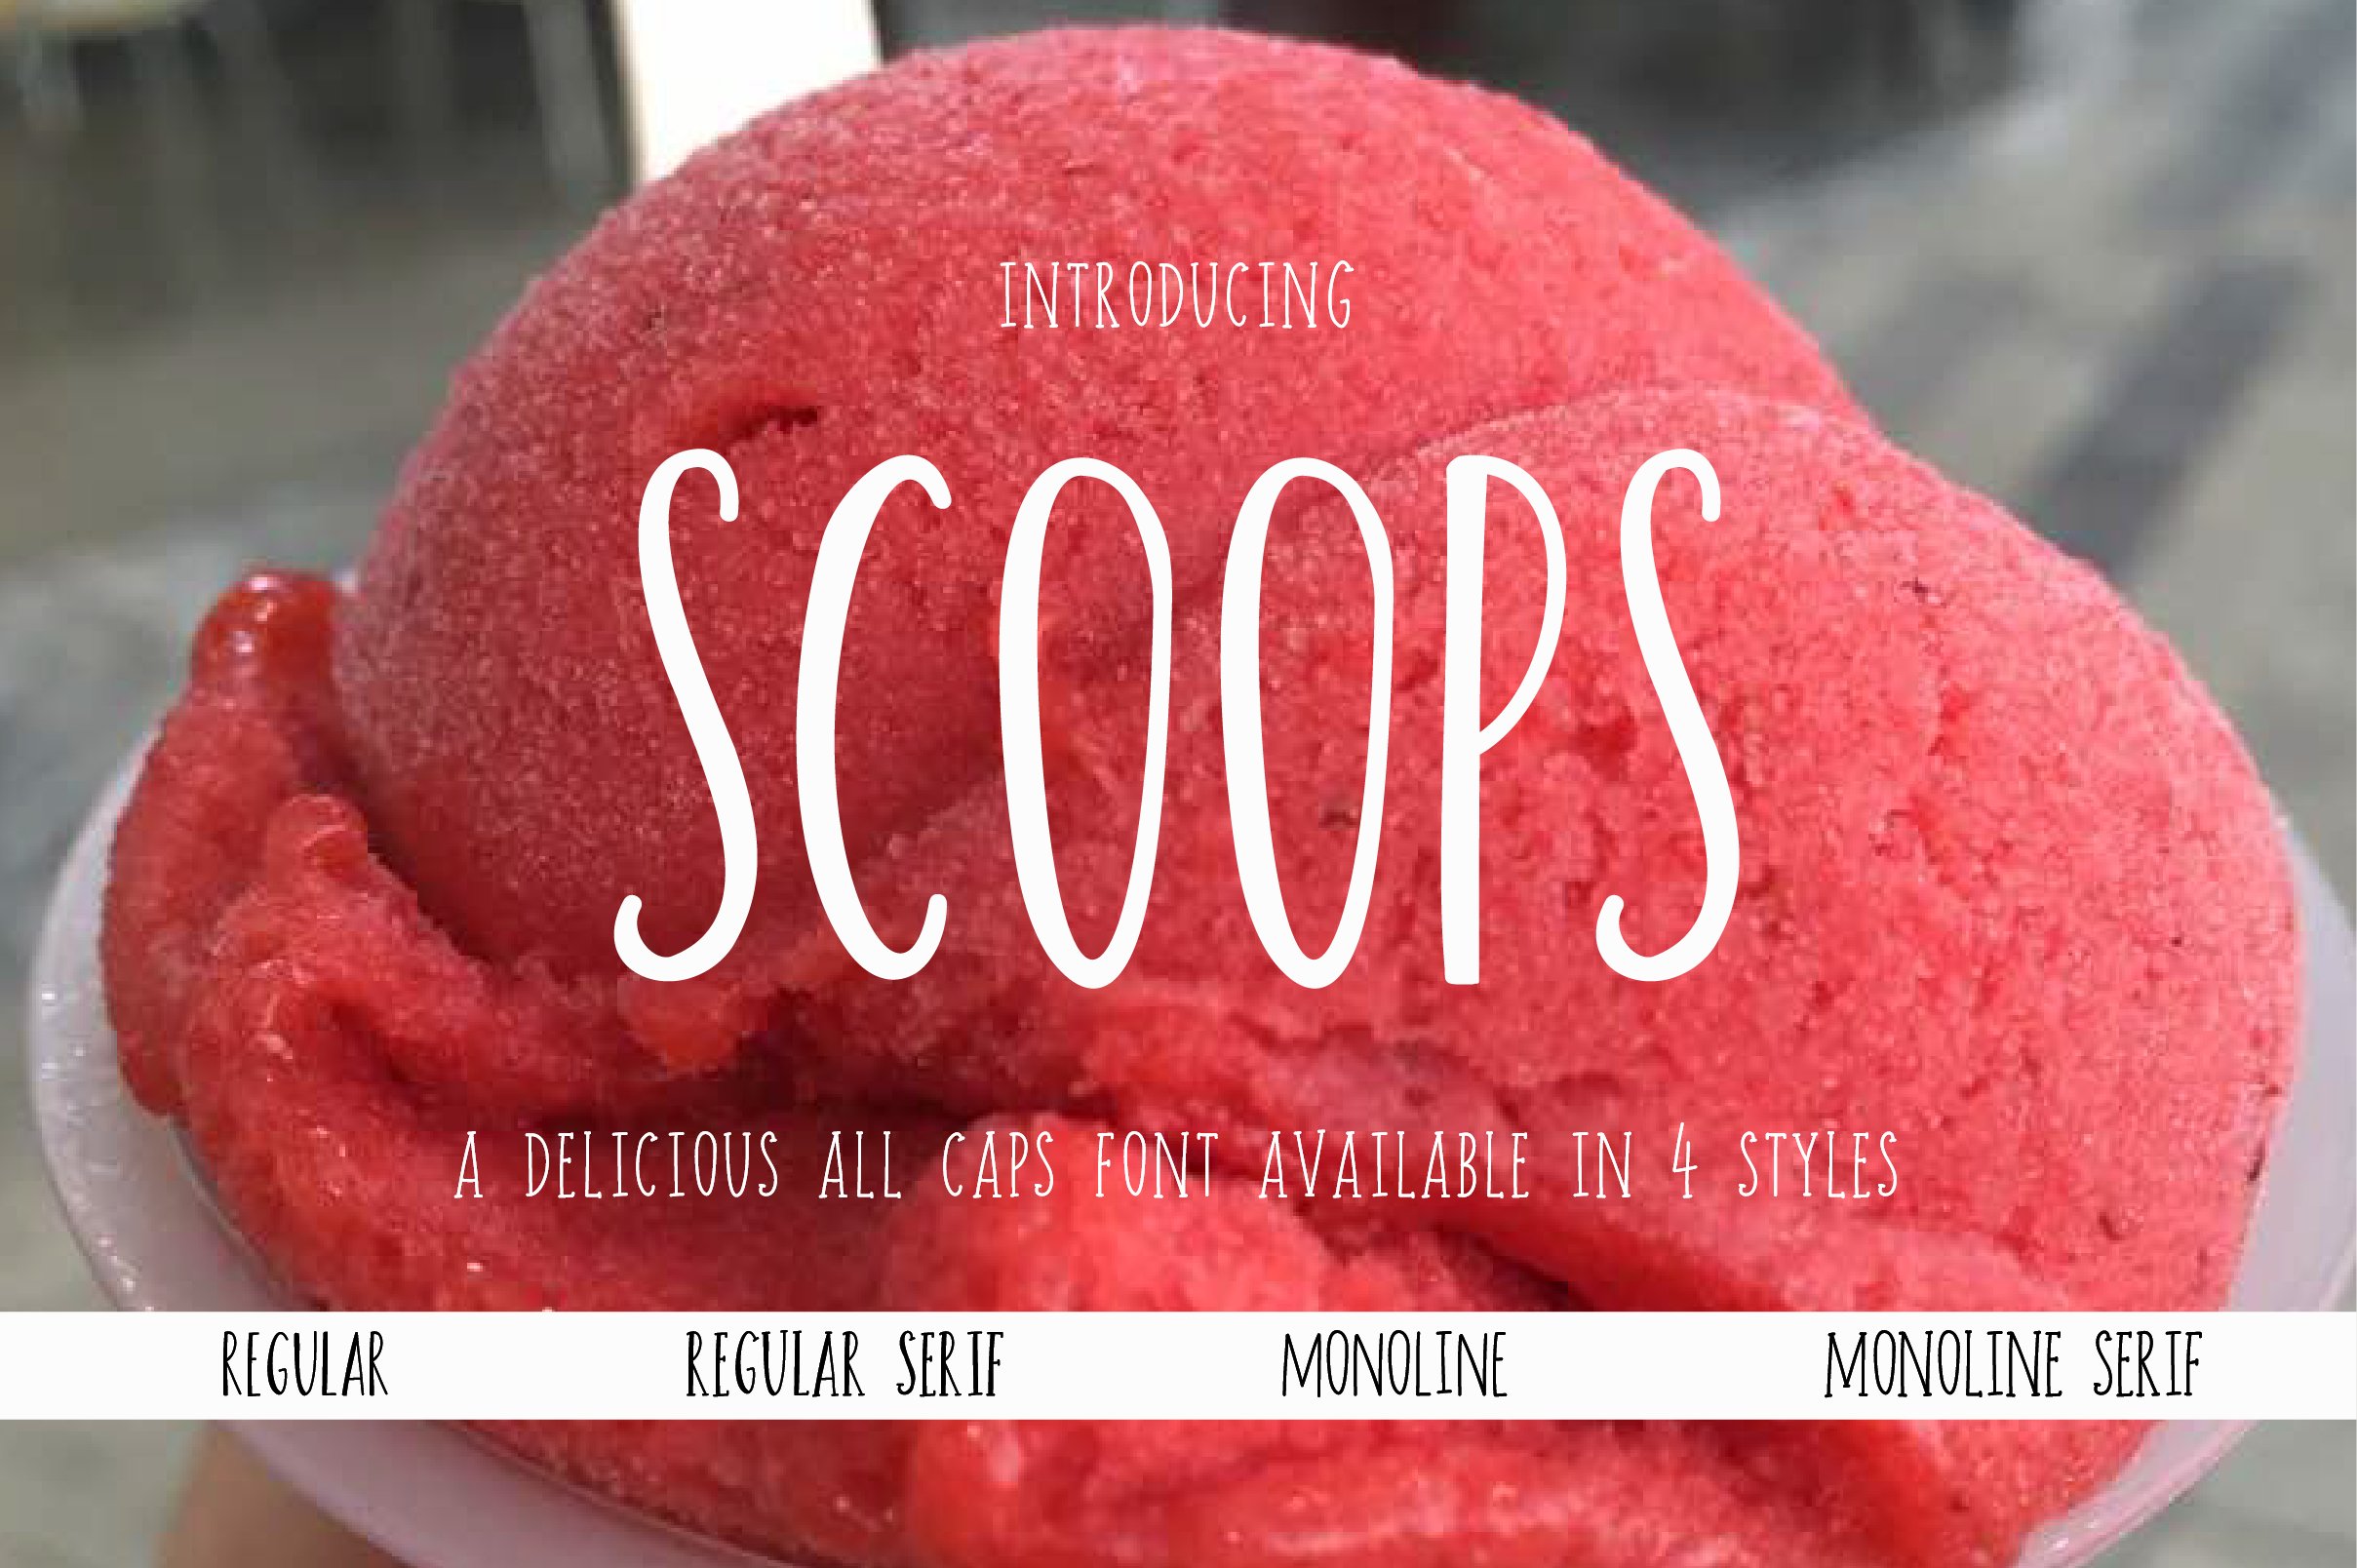 Scoops Font cover image.